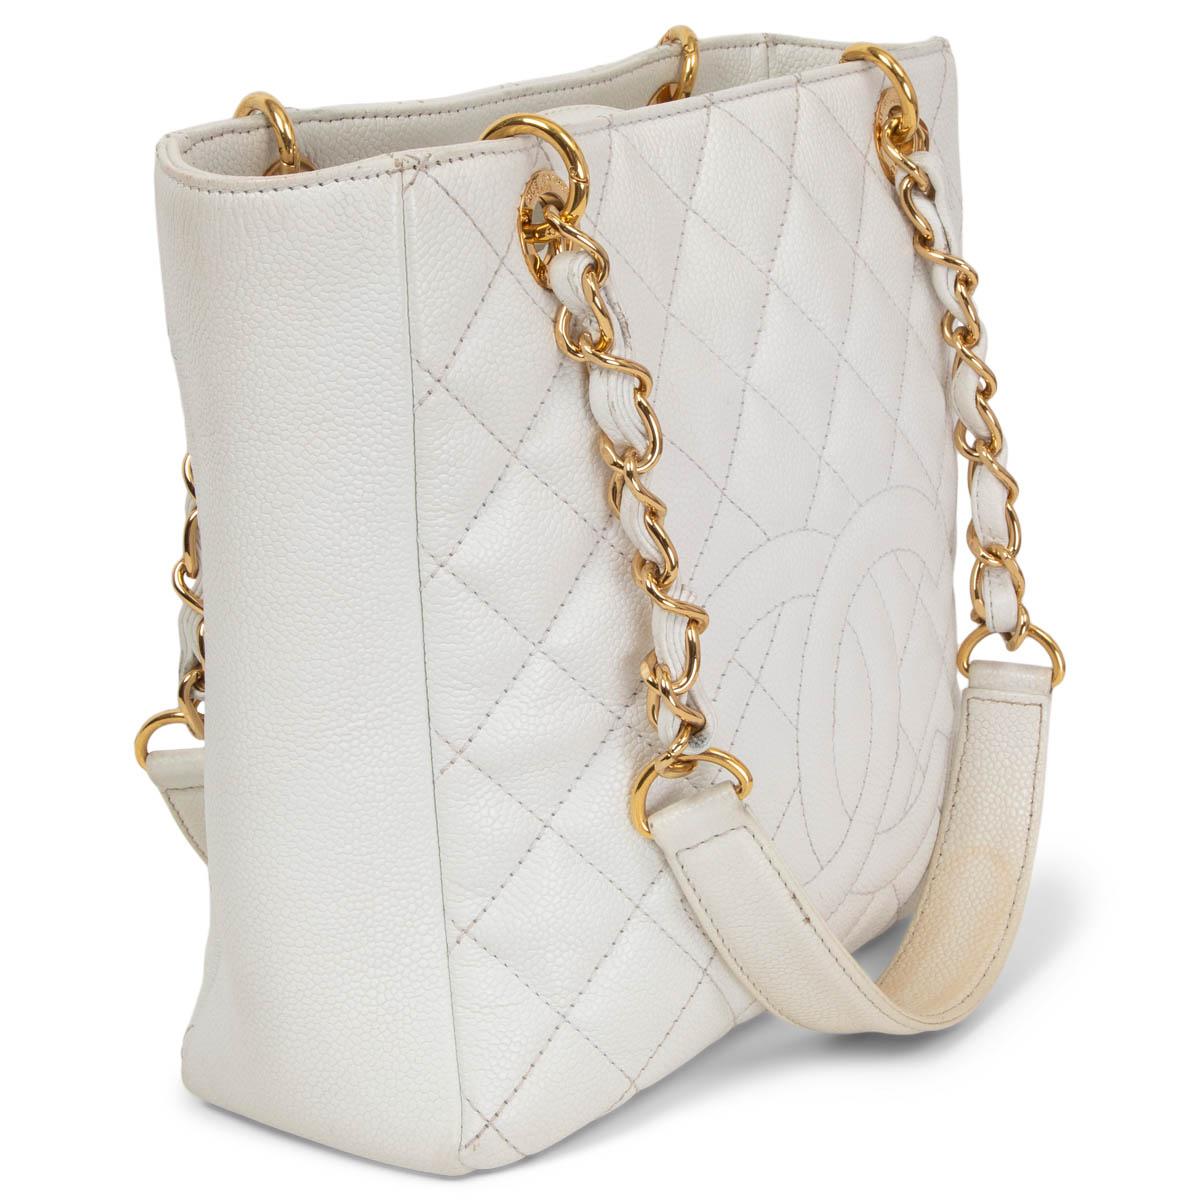 100% authentic Chanel Caviar Quilted Petite Shoppig Tote in white caviar leather featuring gold-tone hardware and CC stitching at front. Opens with a magnetic button on top and is lined in grey nylon with one zipper pocket againt the back and one